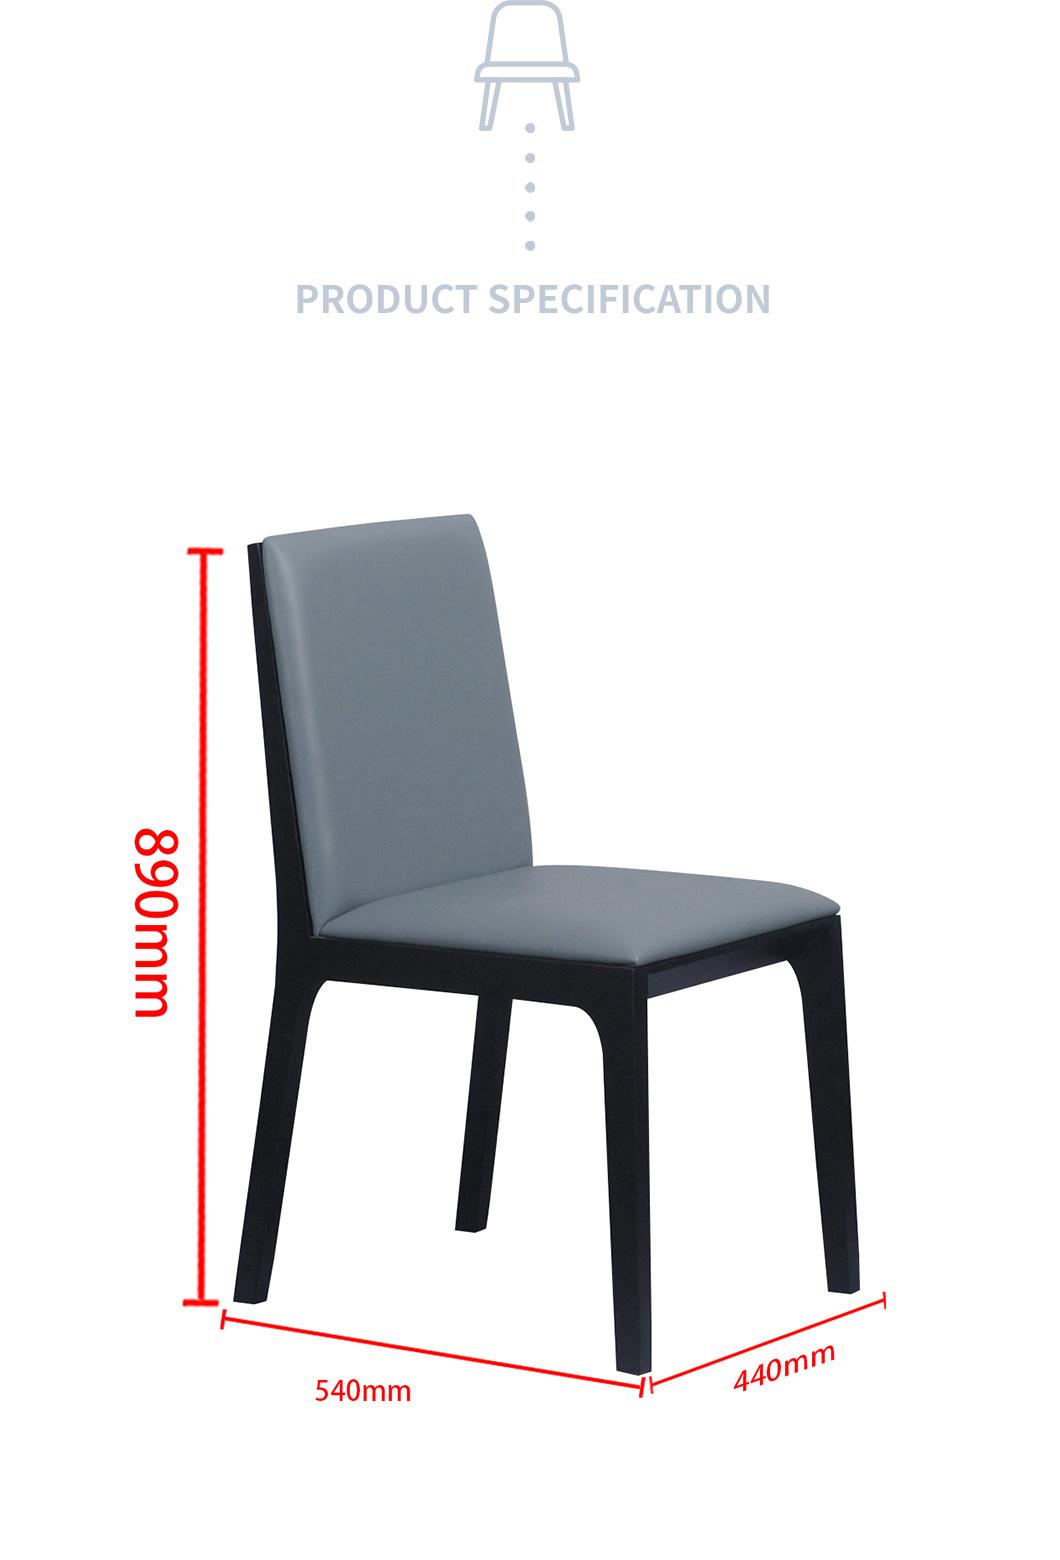 China Supplier Modern Dining Chair Home Hotel Restaurant Dining Furniture